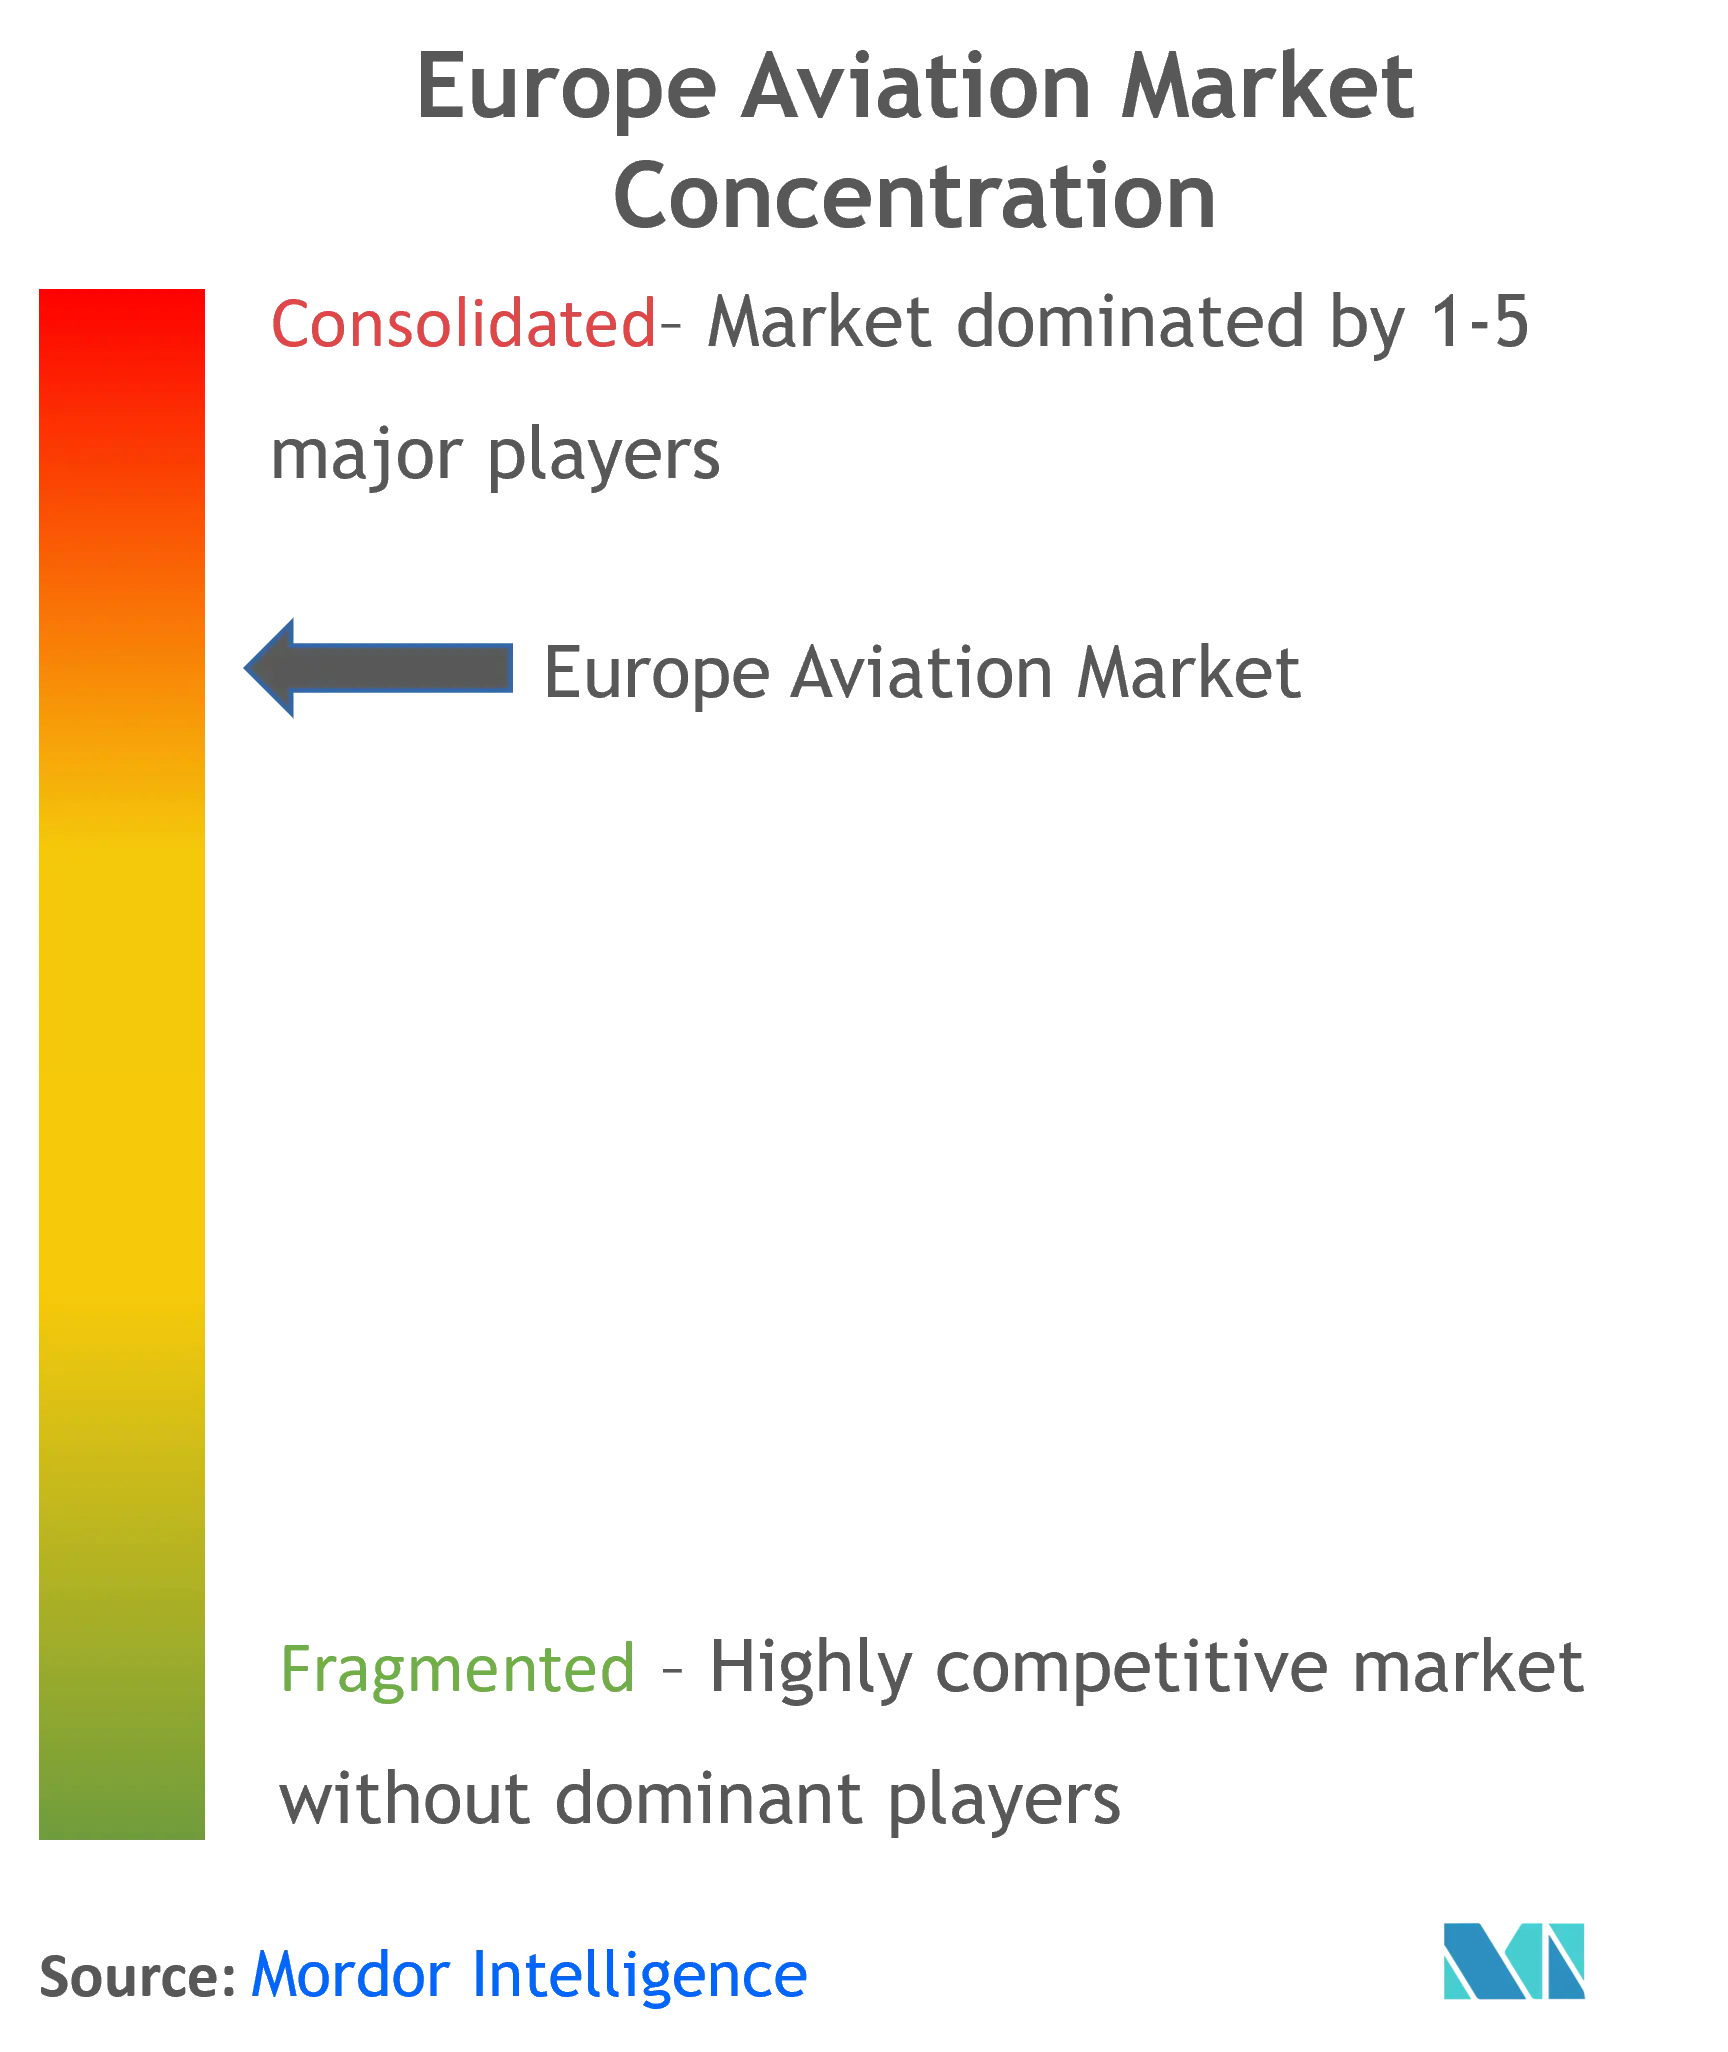 Europe Aviation Market Concentration